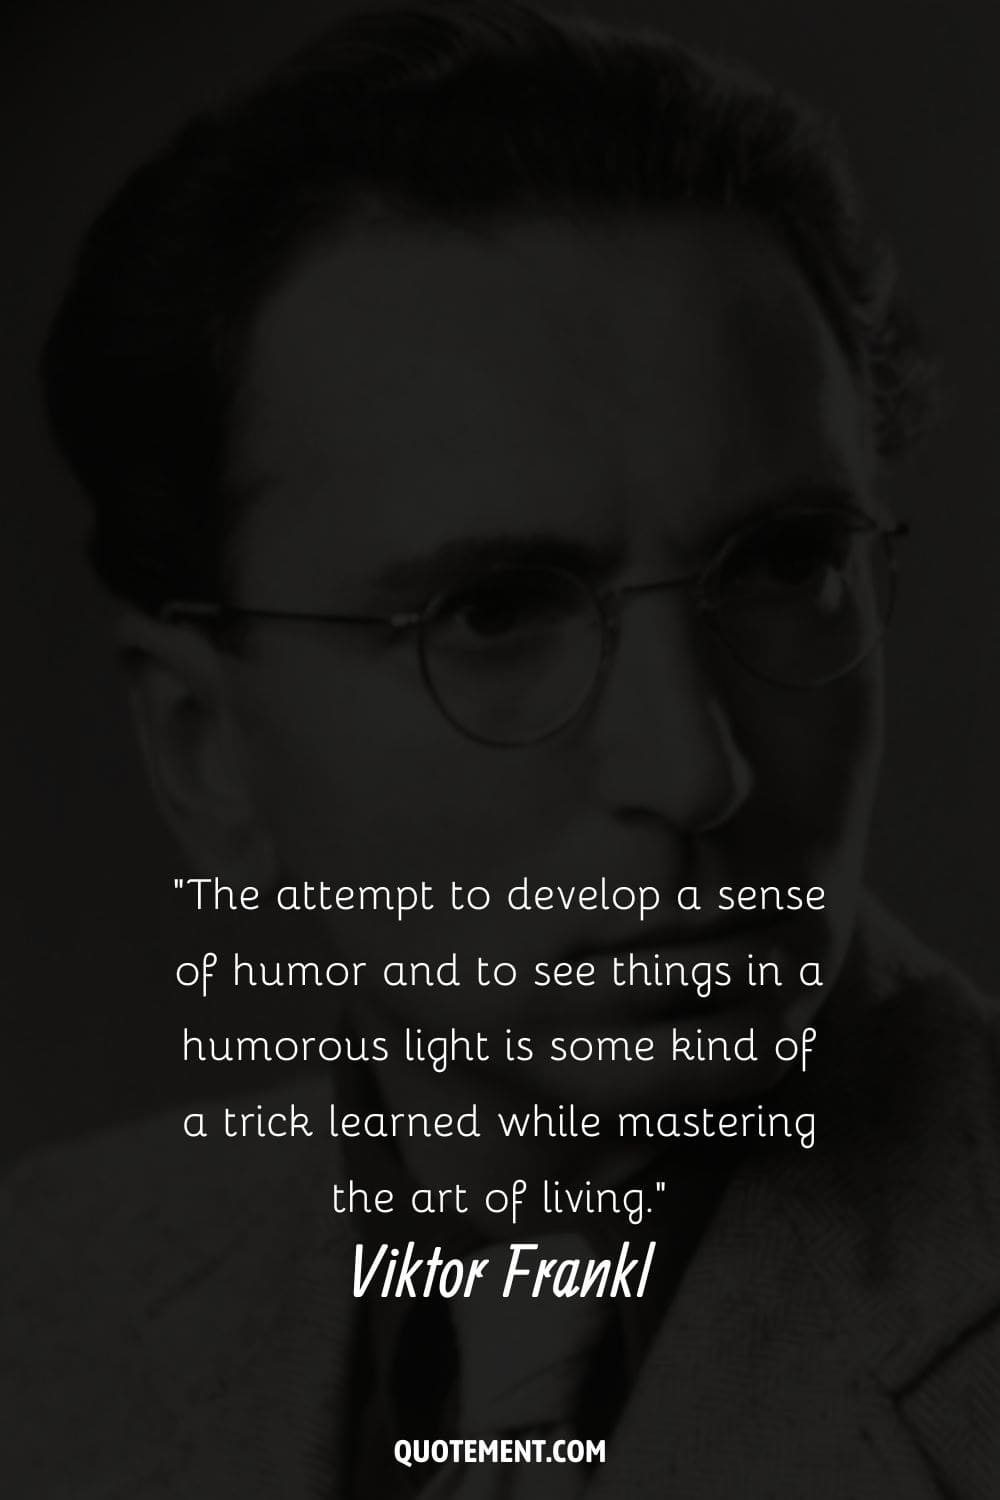 Portrait of Viktor Frankl representing his quote on humor.